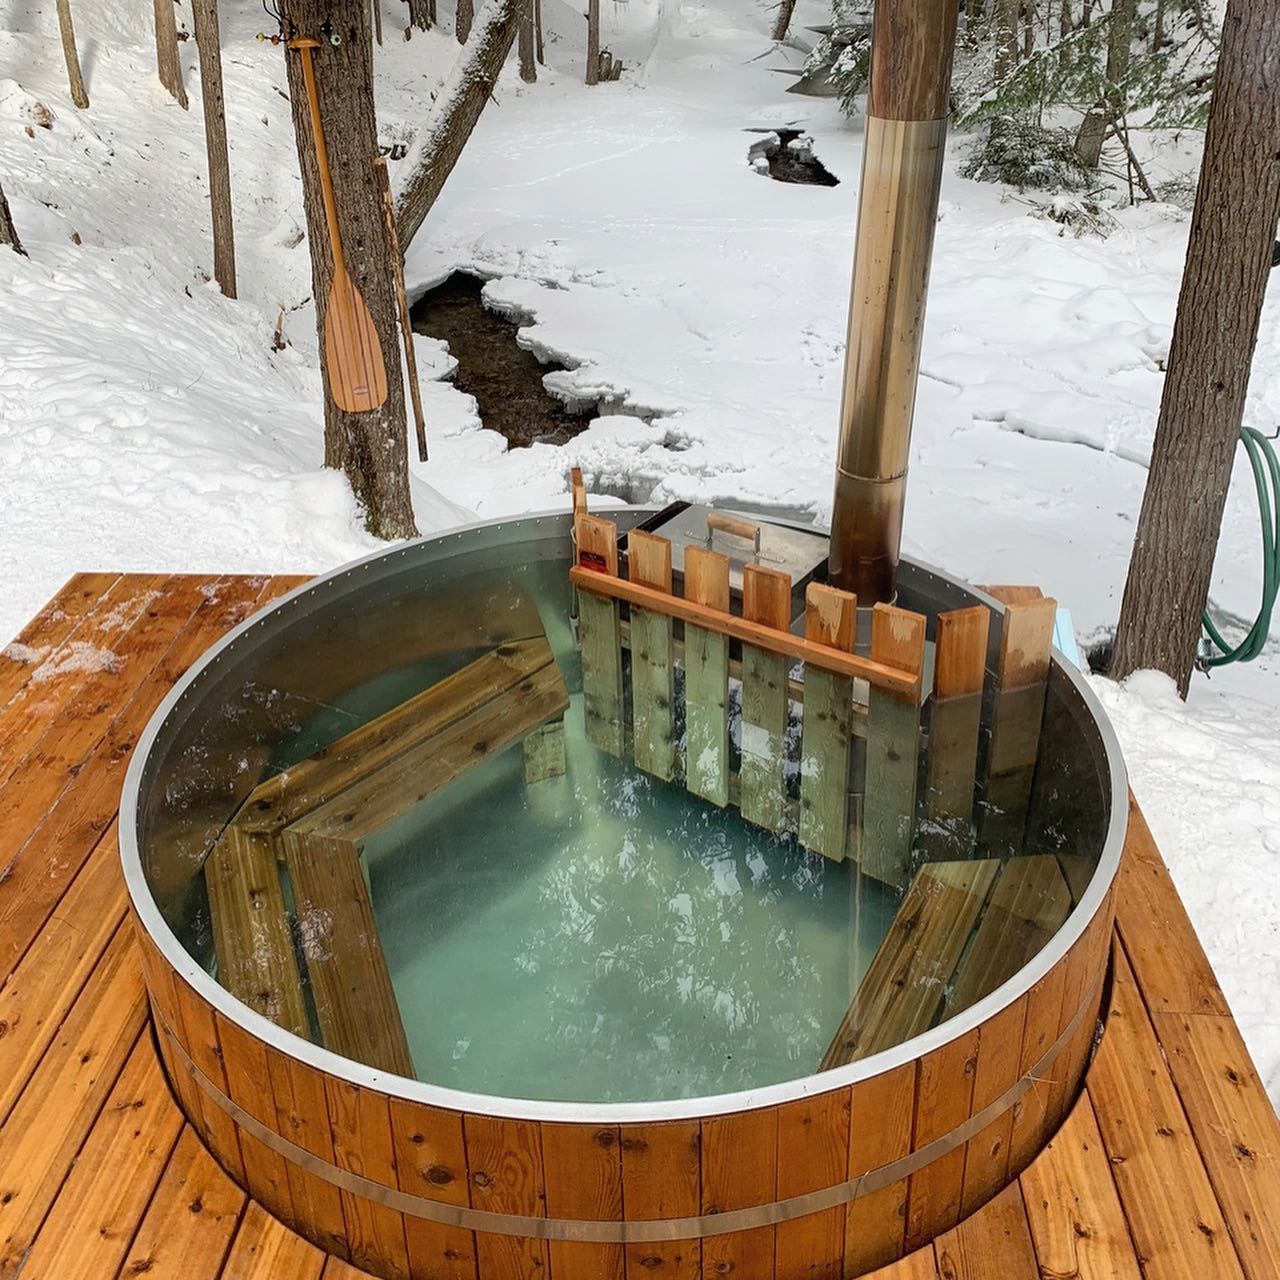 How to cold water plunge using your AlumiTubs Wood-Fired Hot Tub